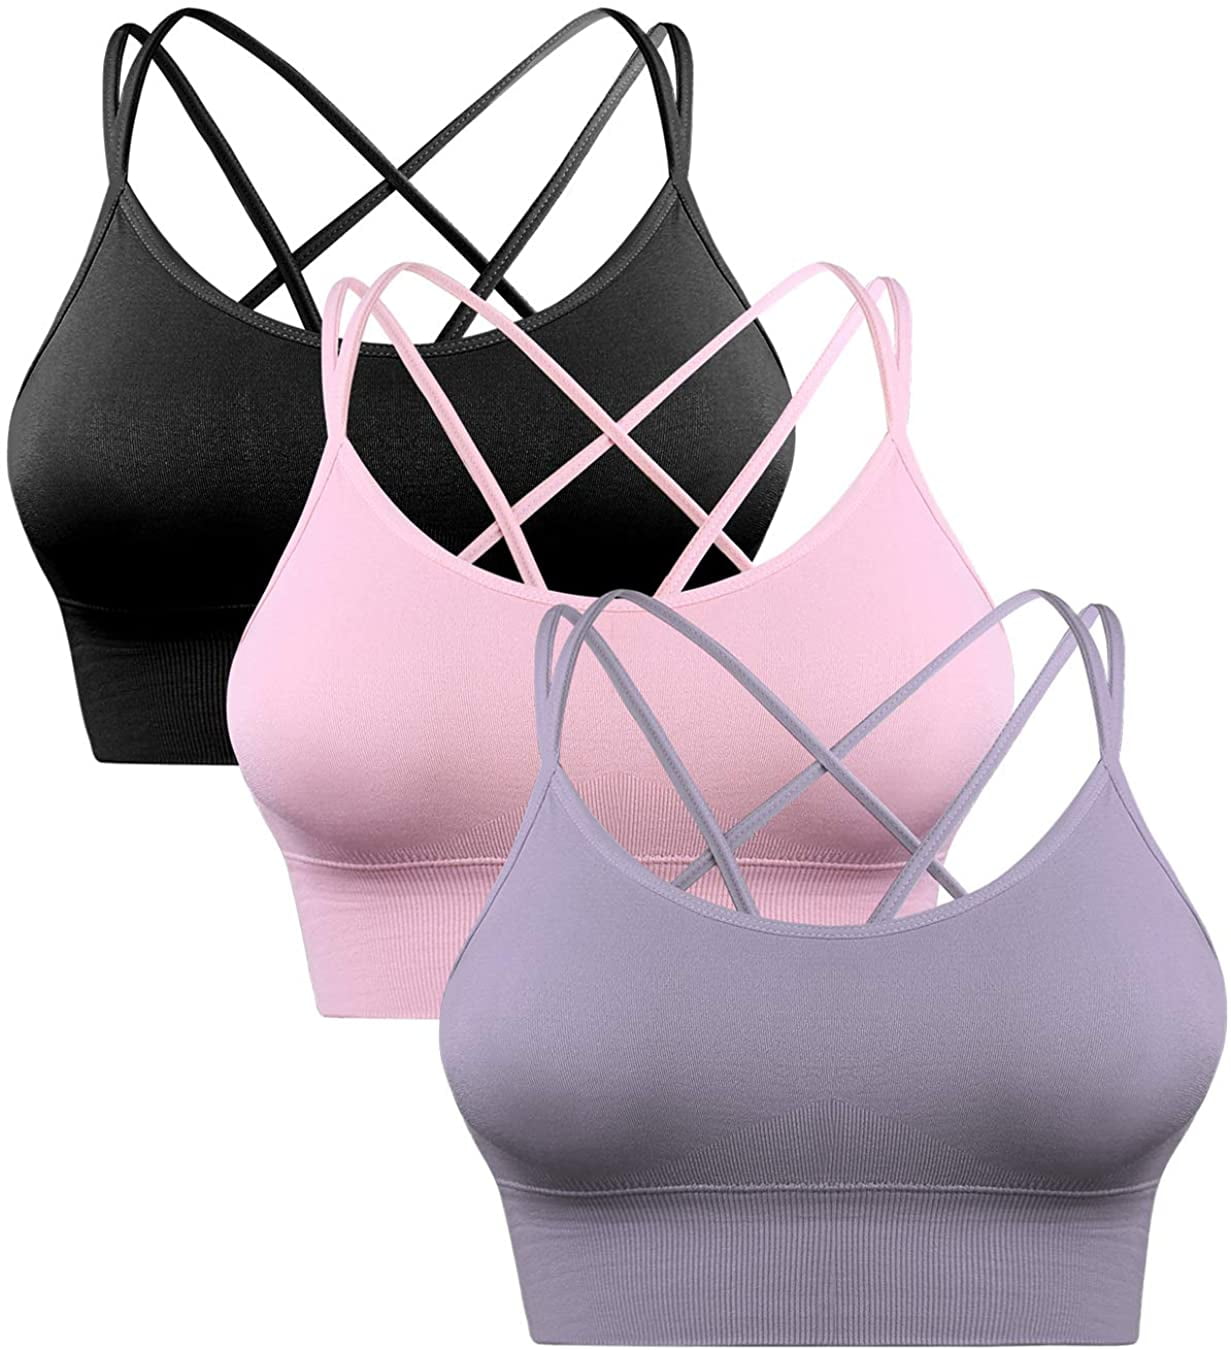 BAOMOSI Womens Freedom Seamless Wireless Sports Bra with Removable Pads Underwear Pack of 3 or 4 